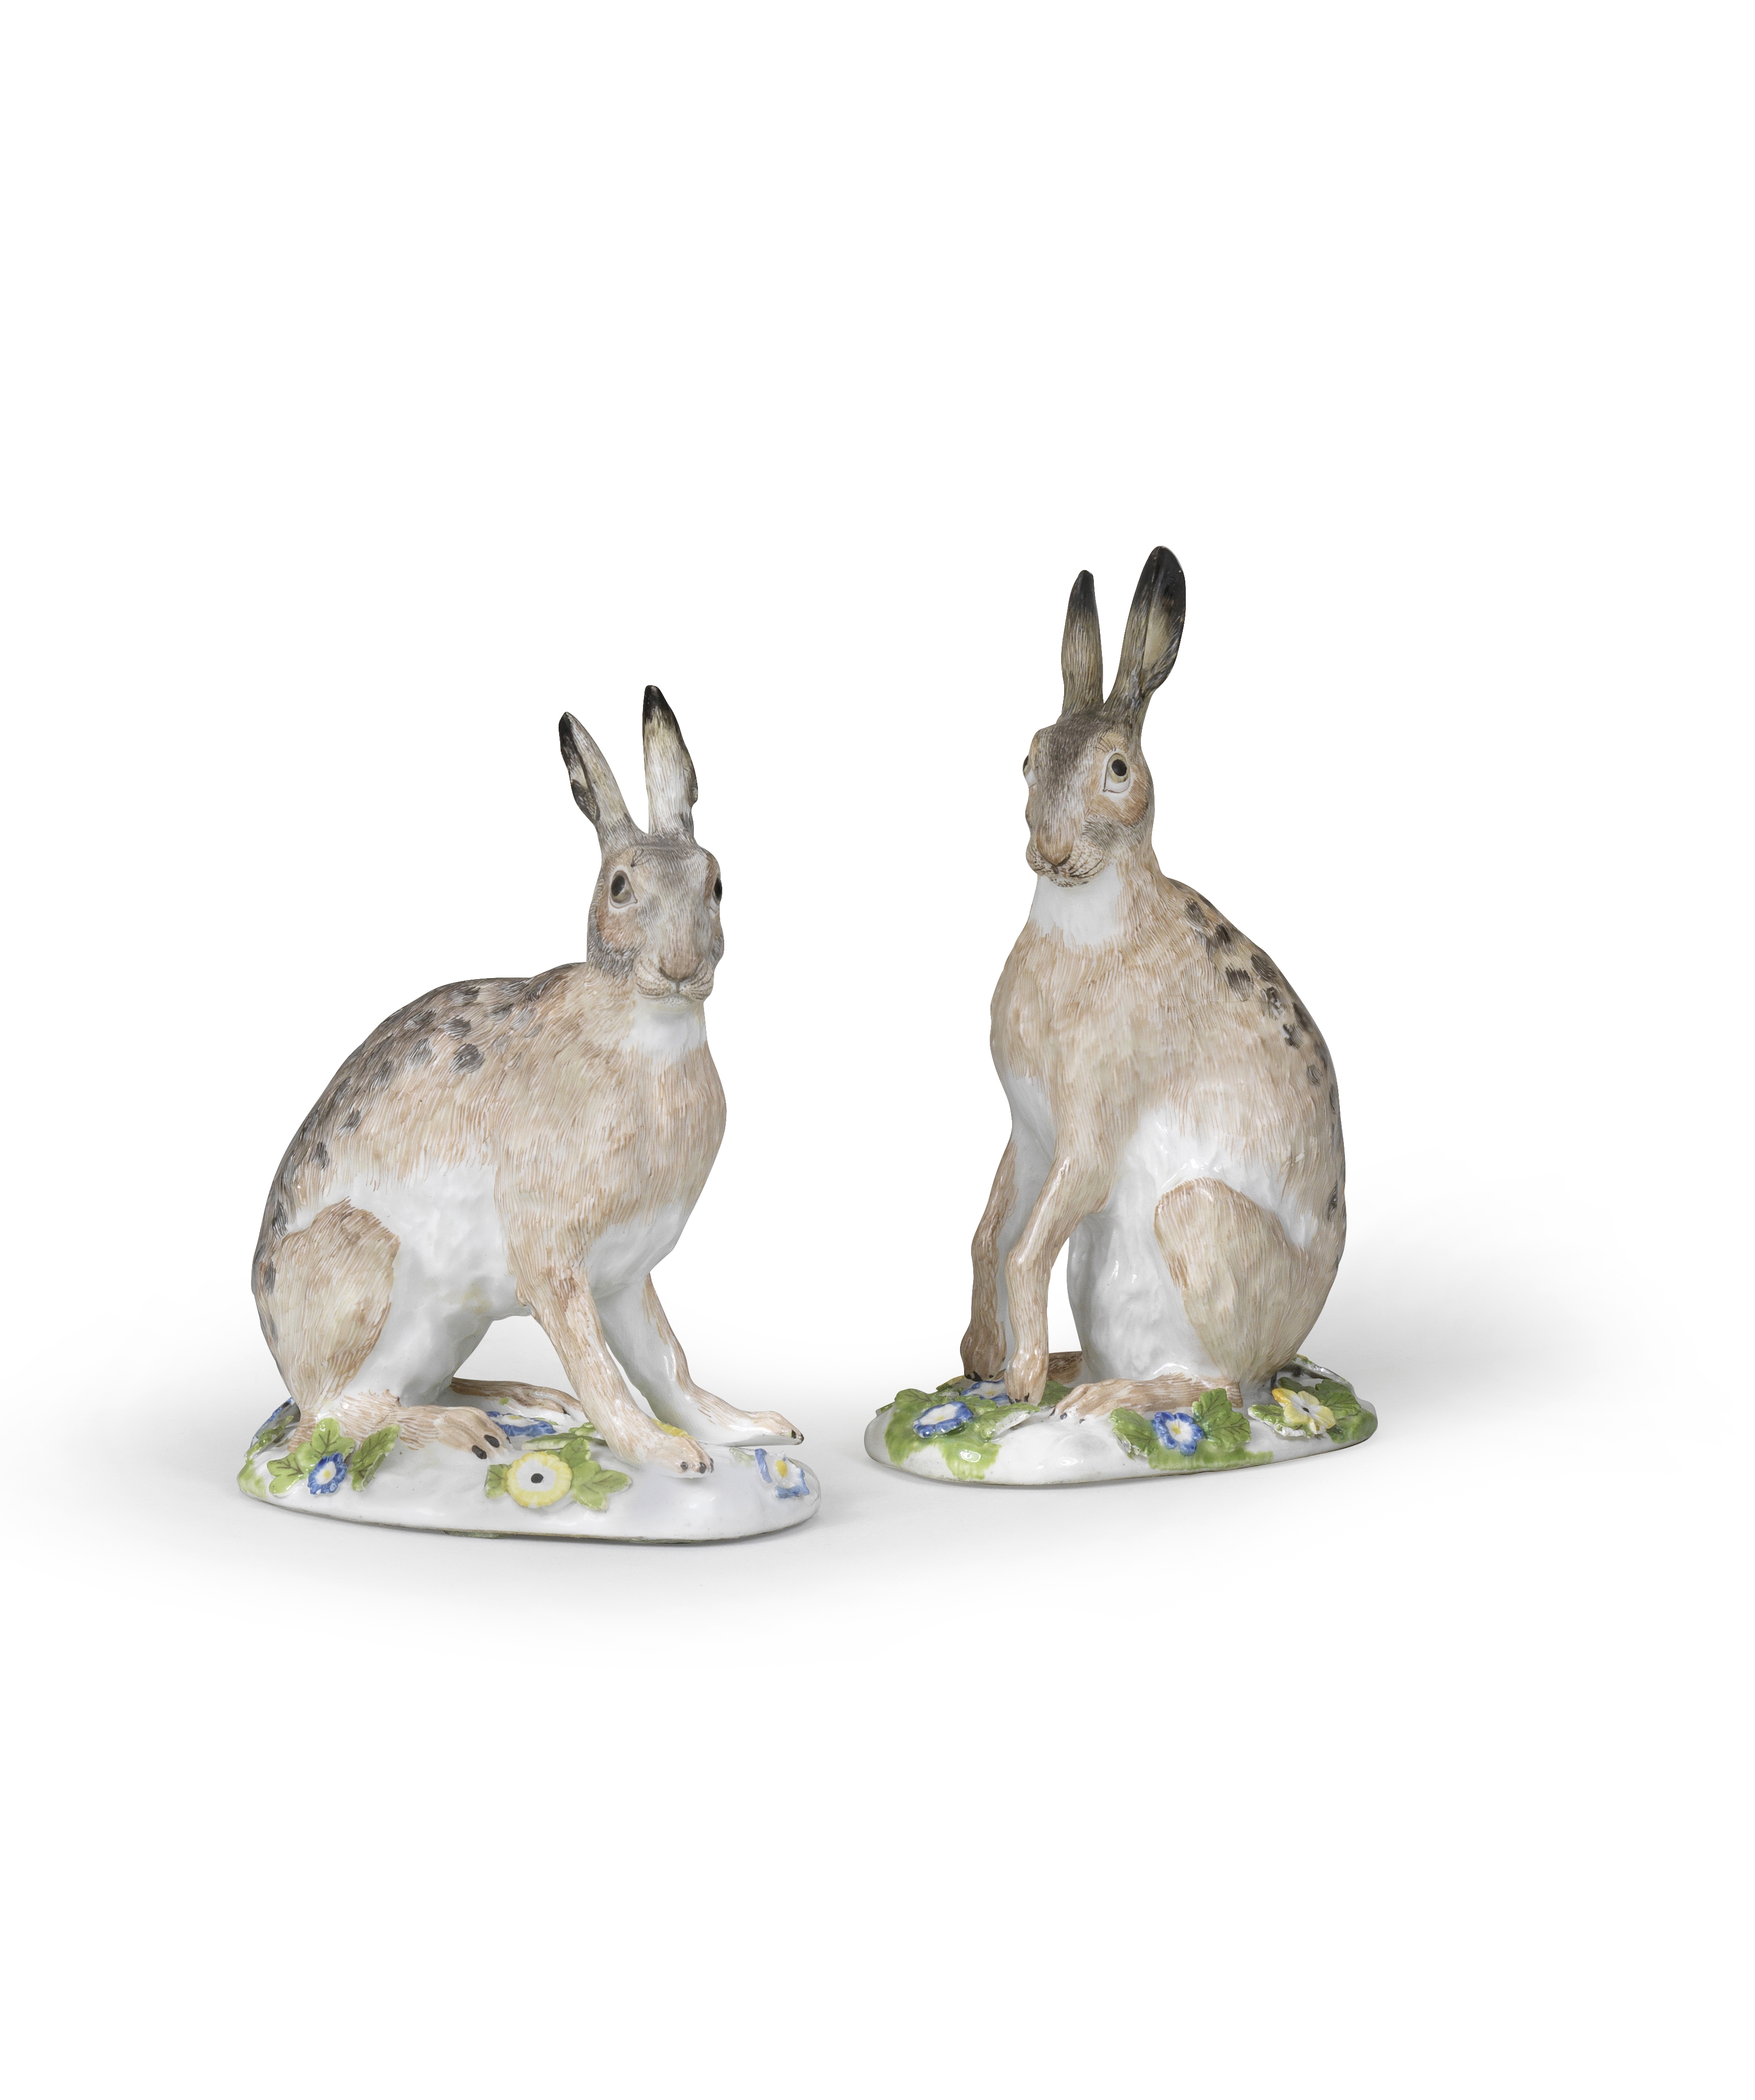 A pair of Meissen models of hares, circa 1750